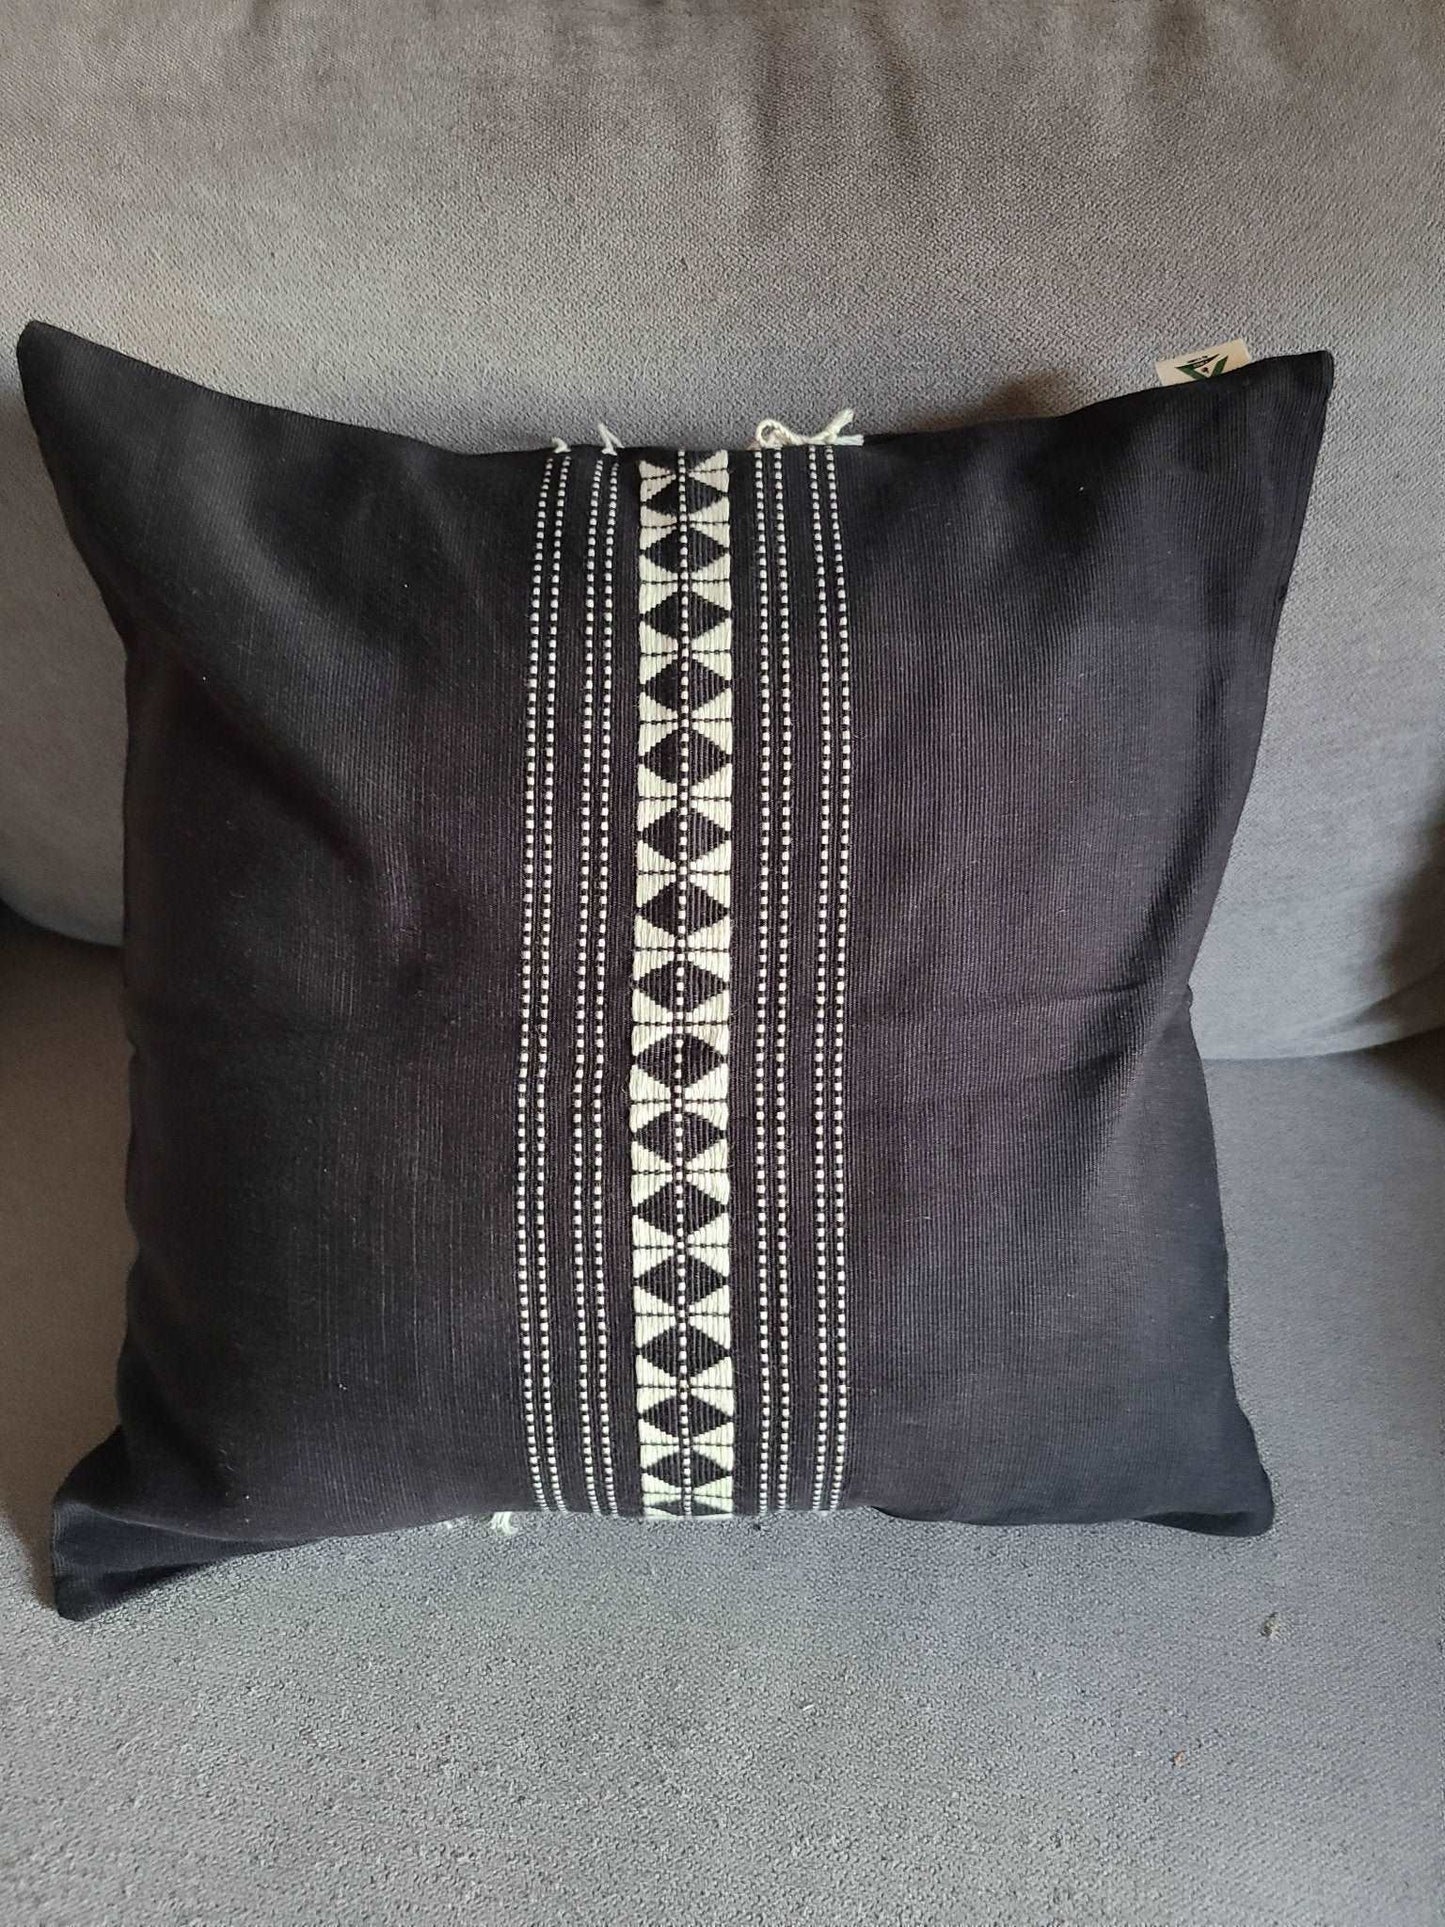 Authentic Nagaland Cushion Covers | Handwoven Designs | IndiaNidhi - Indianidhi